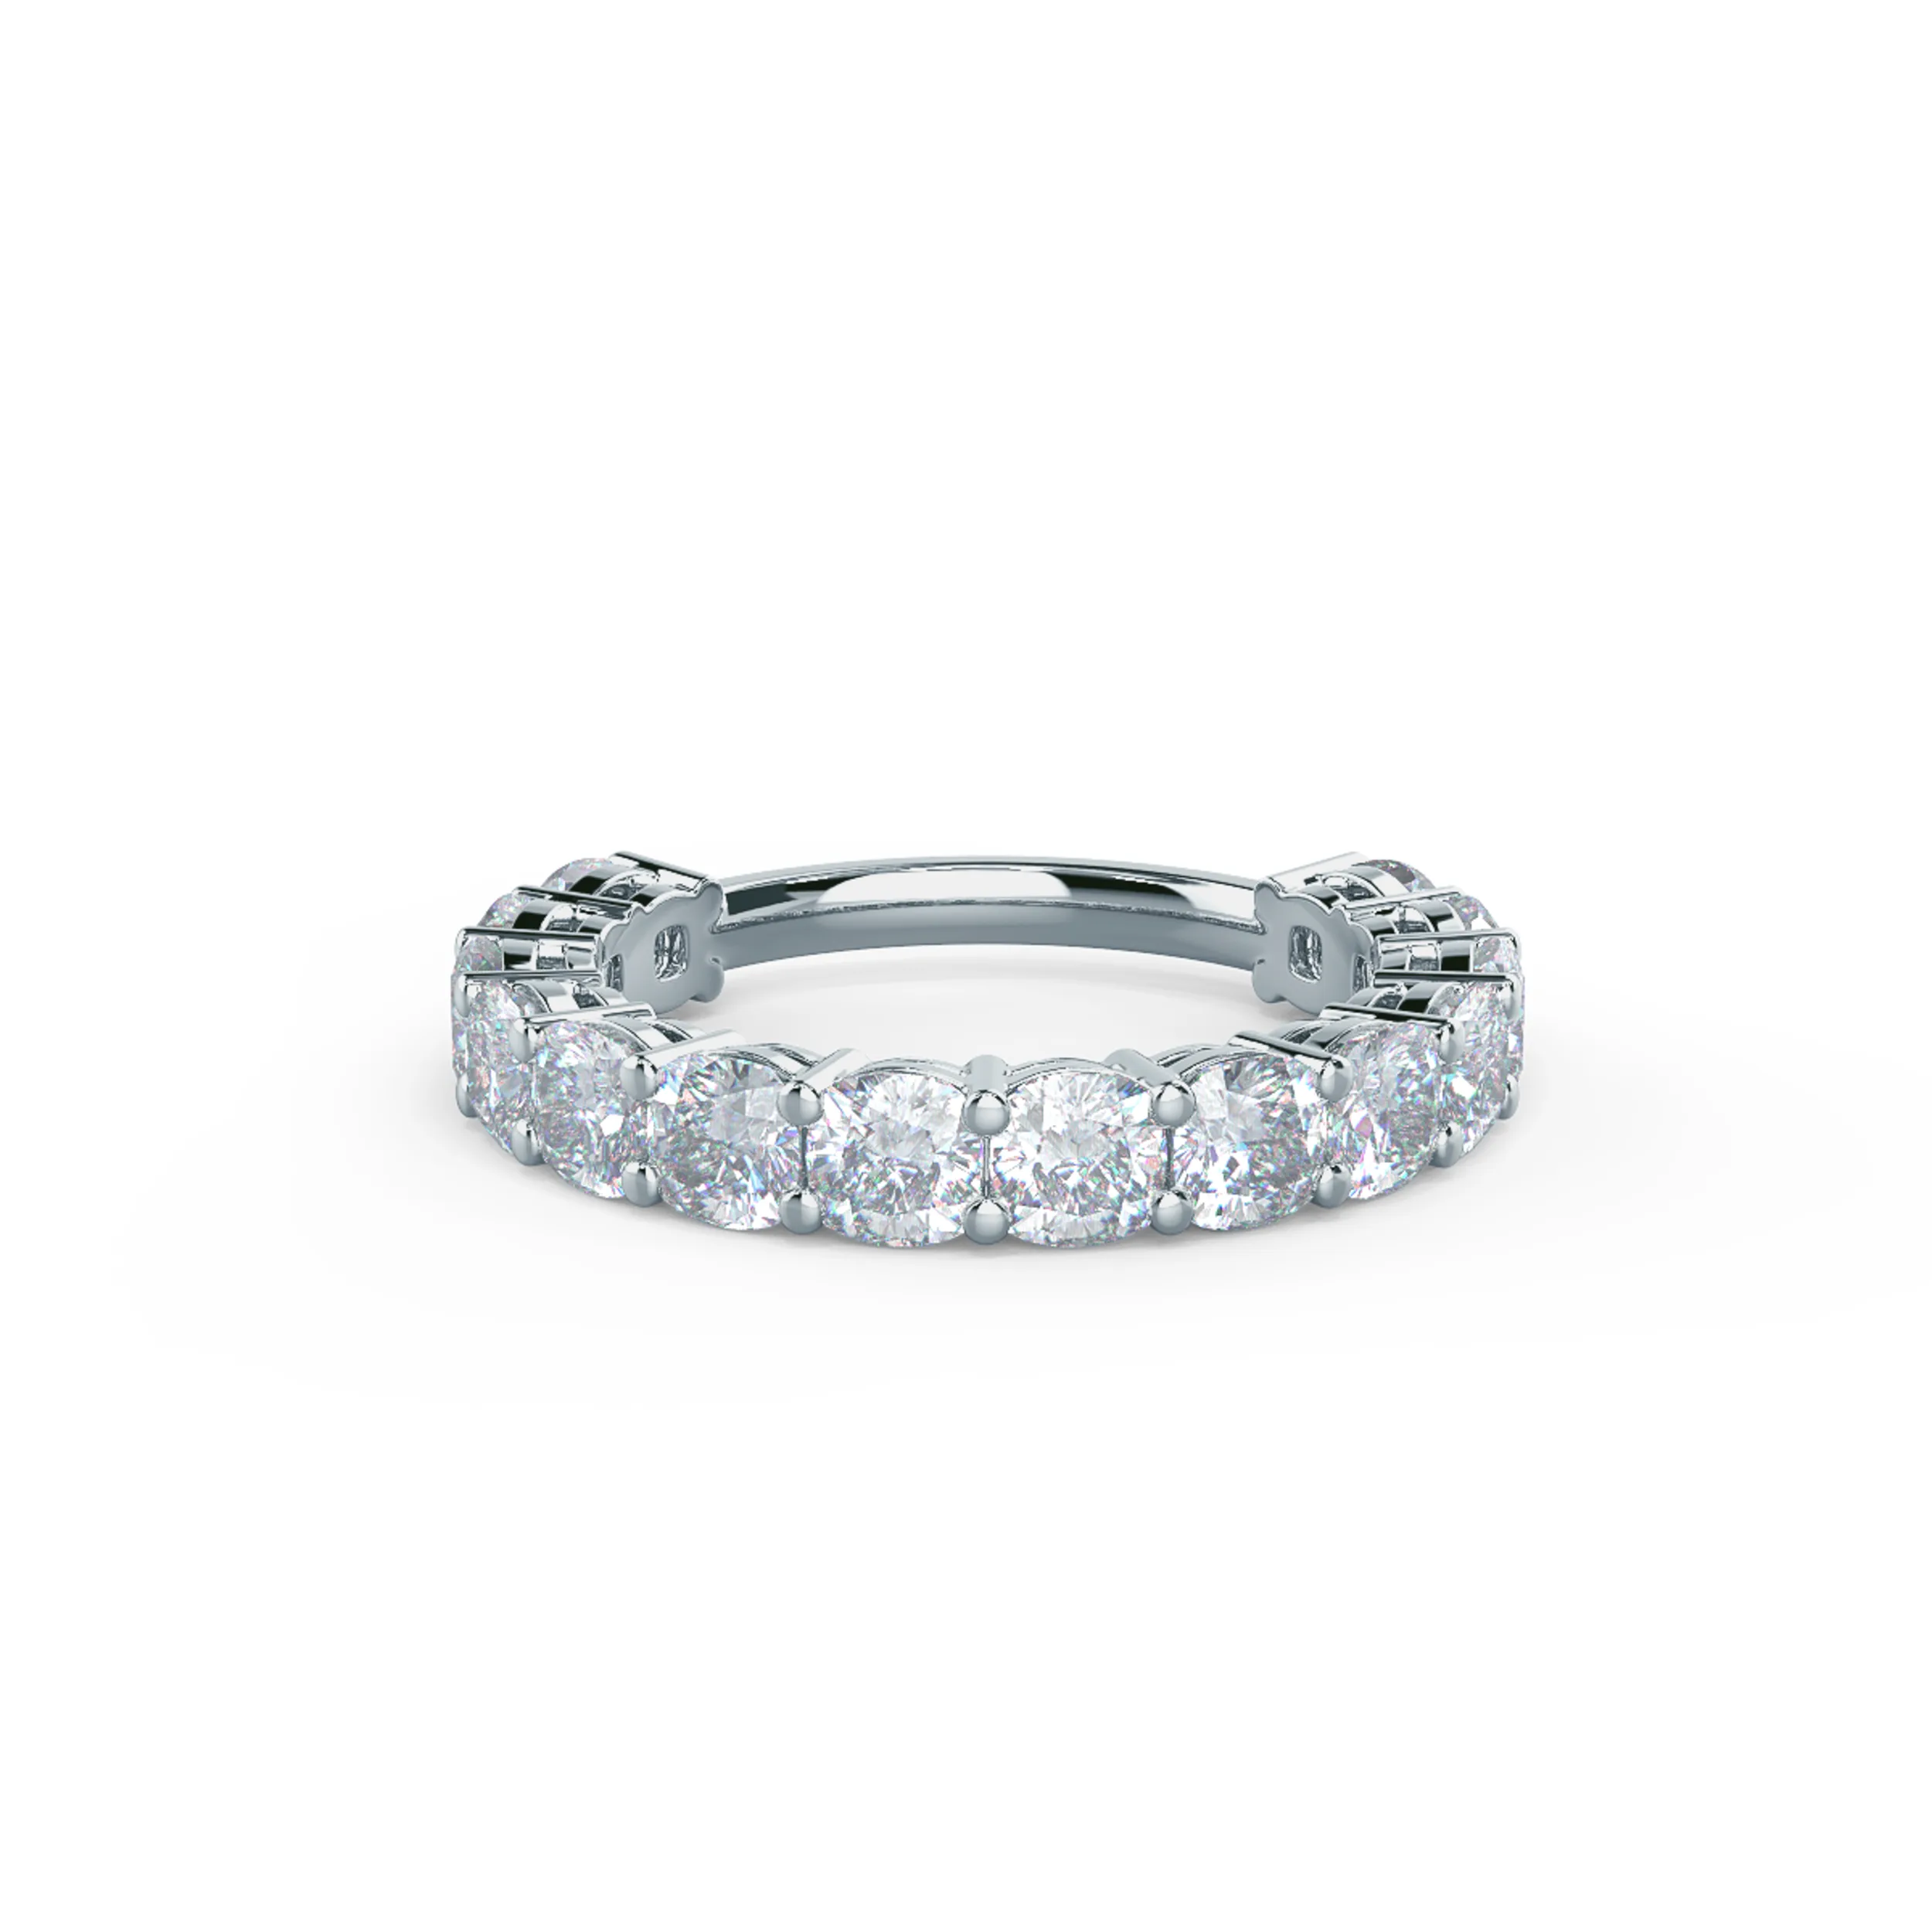 3.5 Carat Synthetic Diamonds set in 18k White Gold Cushion Three Quarter Band (Main View)